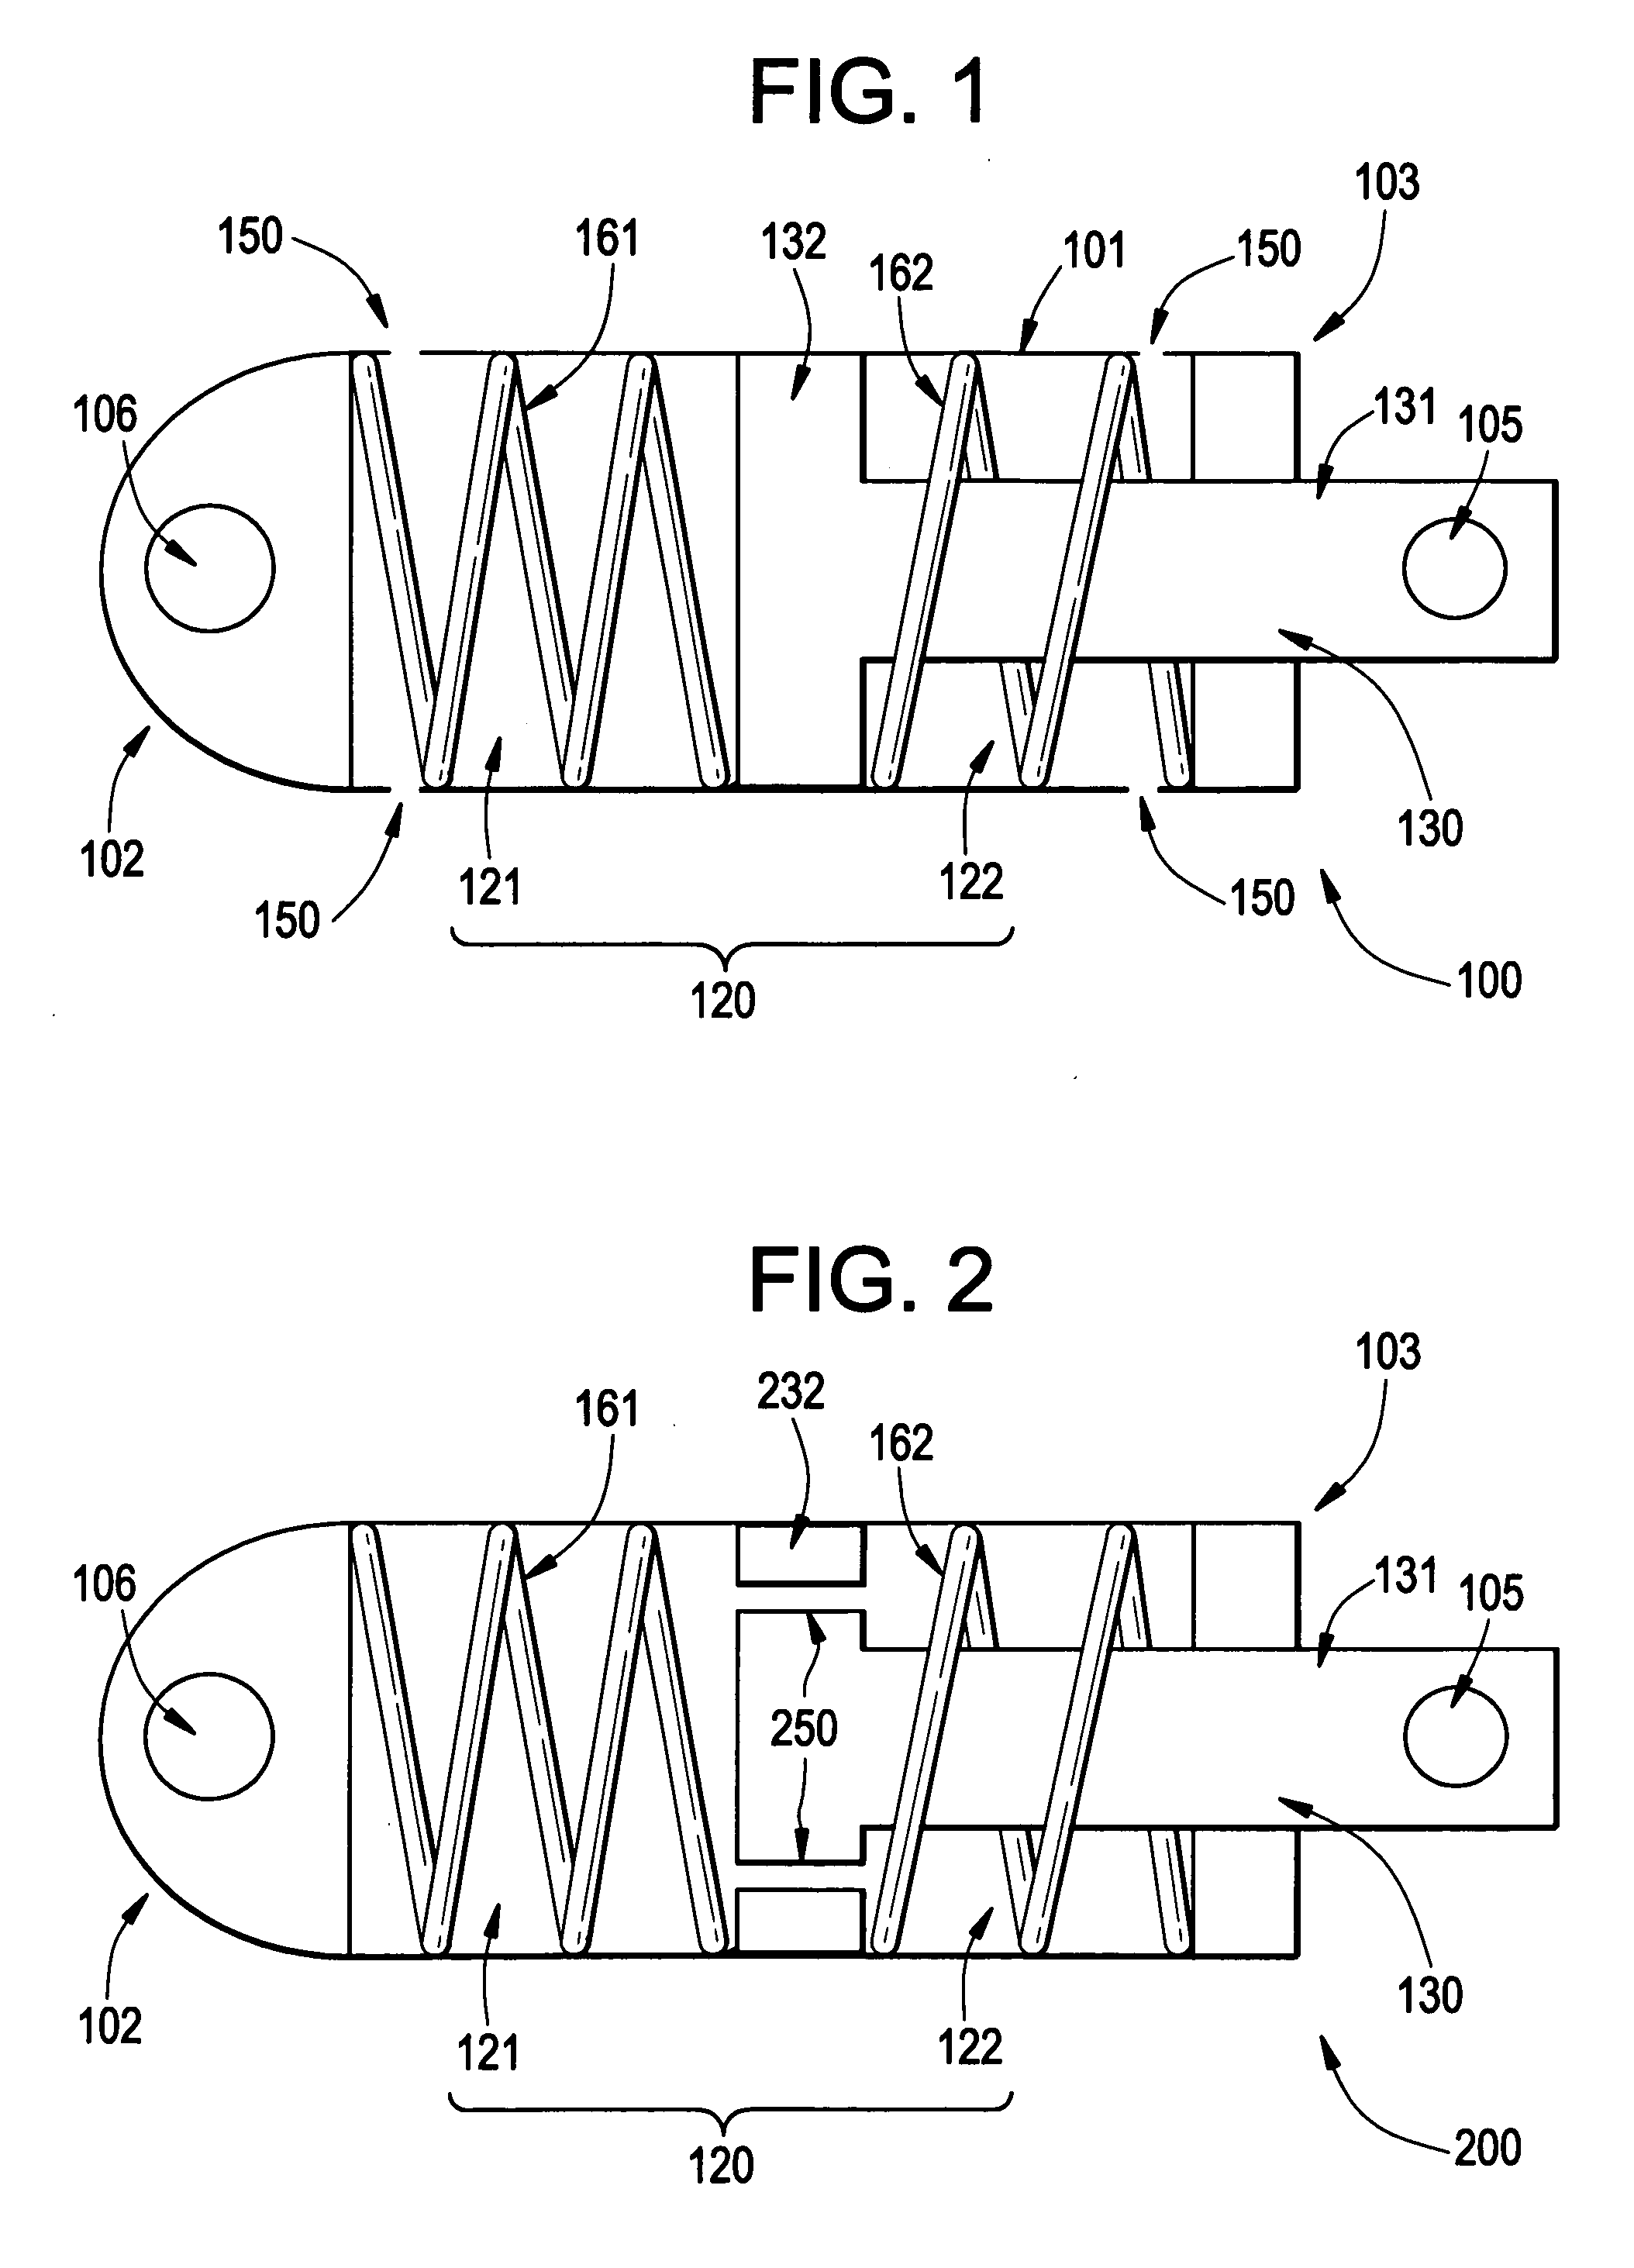 Apparatuses and methods for damping nuclear reactor components